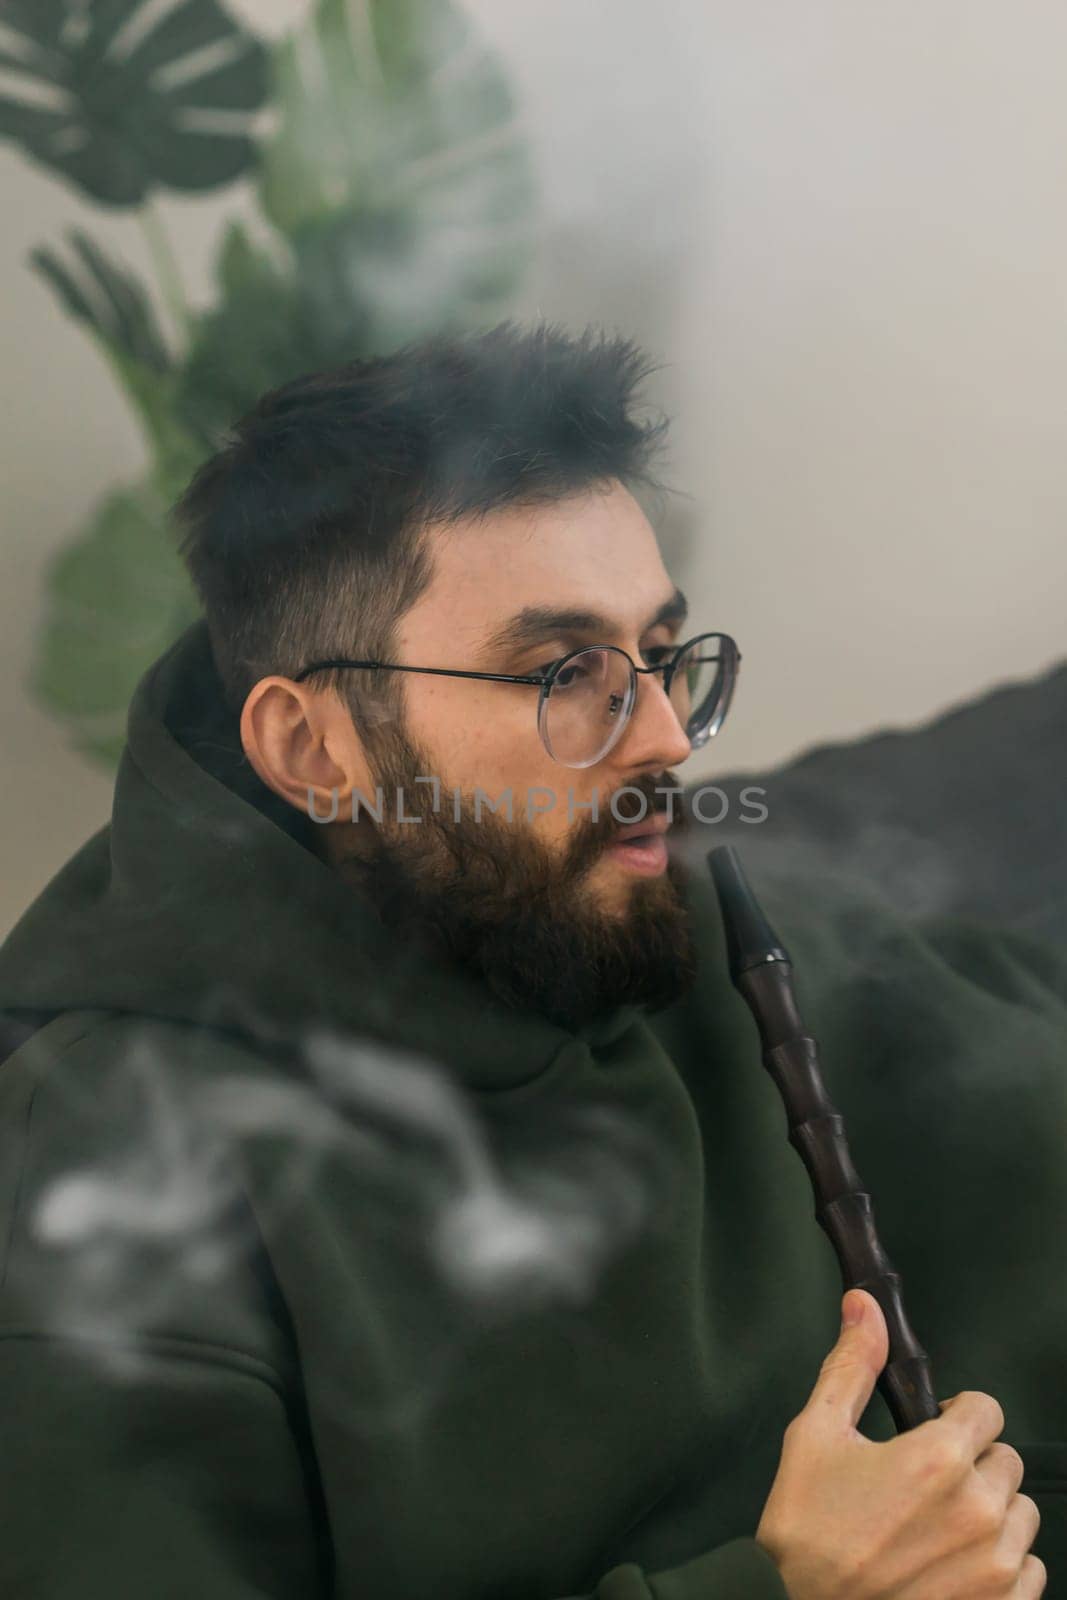 Bearded man is smoking hookah at home and blowing cloud of smoke - chill time and resting concept by Satura86